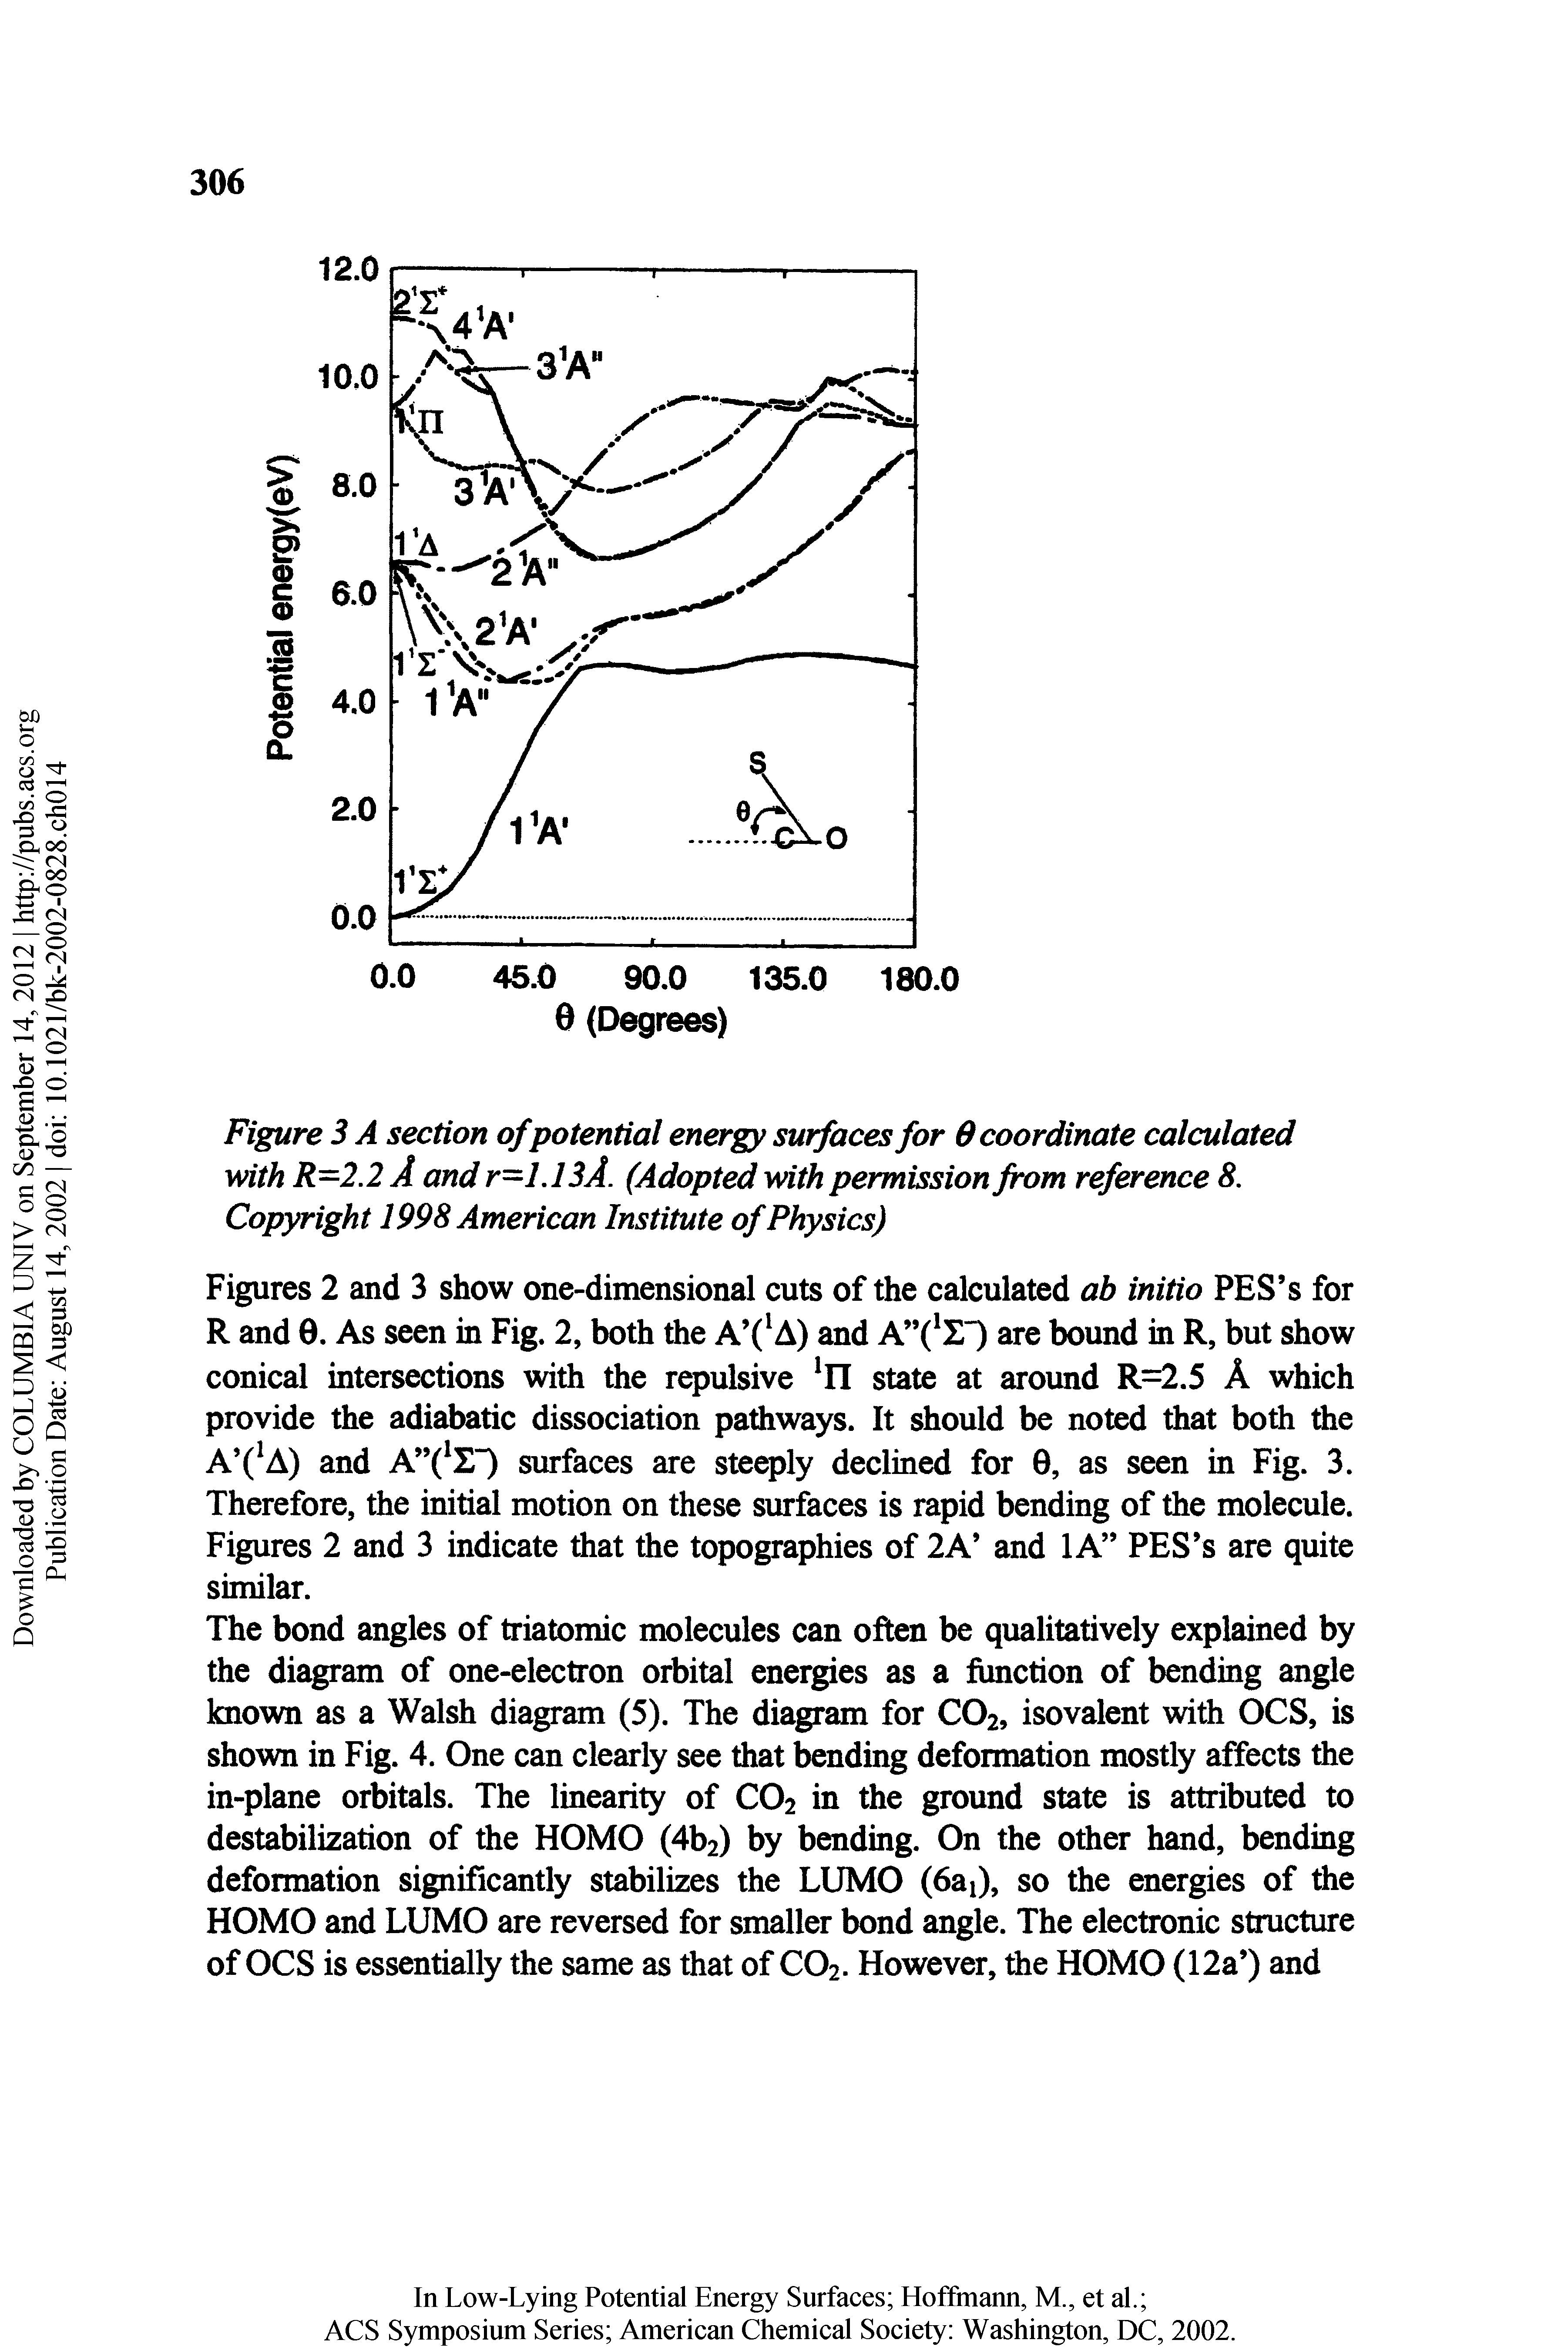 Figure 3 A section of potential energy surfaces for coordinate calculated with R-2.2 A and r=1.13A. (Adopted with permission fwm reference 8. Copyright 1998 American Institute of Physics)...